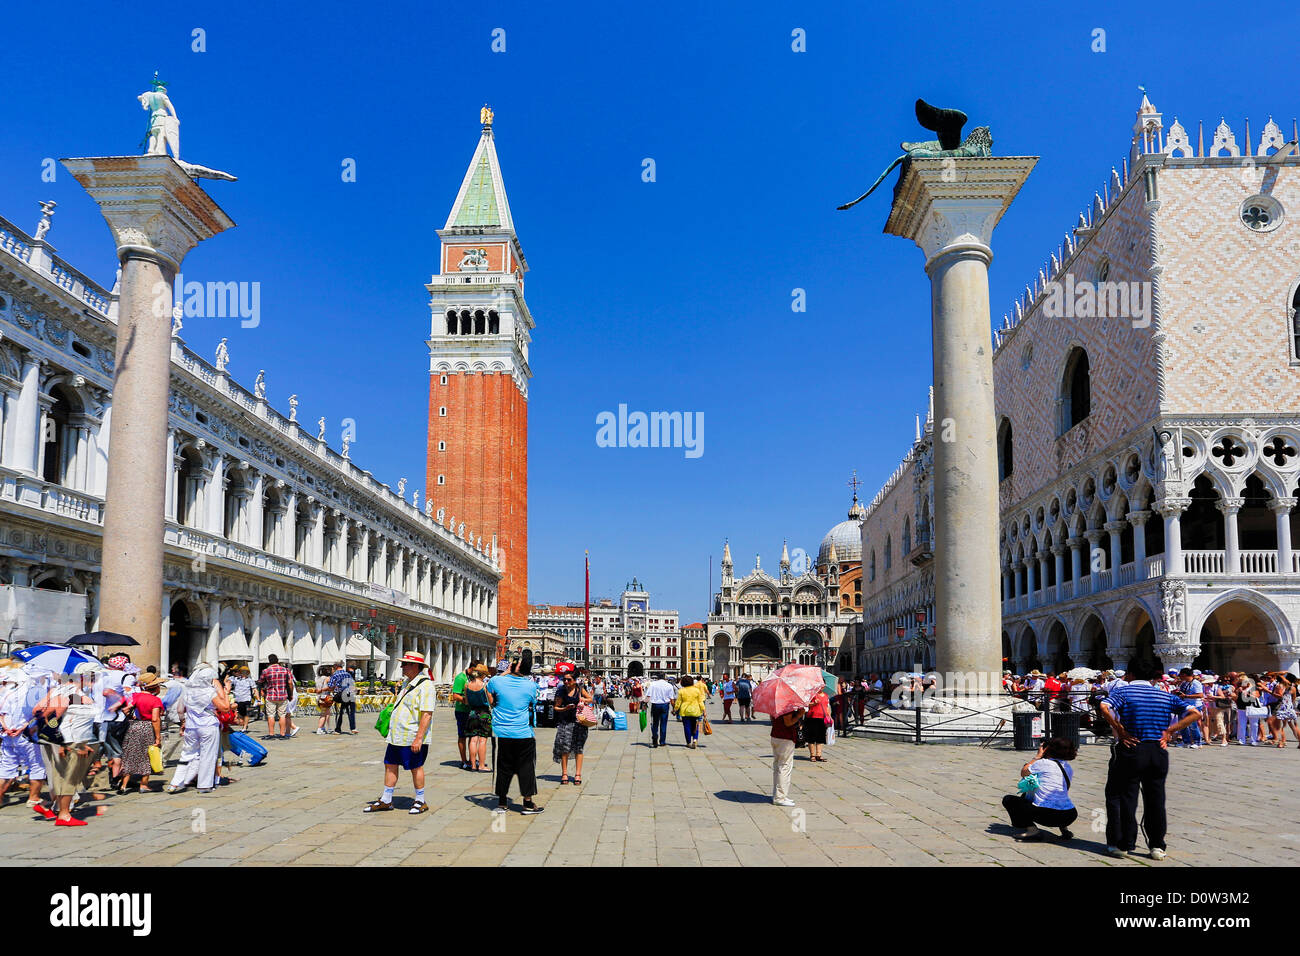 Italy, Europe, travel, Venice, San Marco, Square, cathedral, ducale, palace, square, tourism, tourists, Unesco, Stock Photo